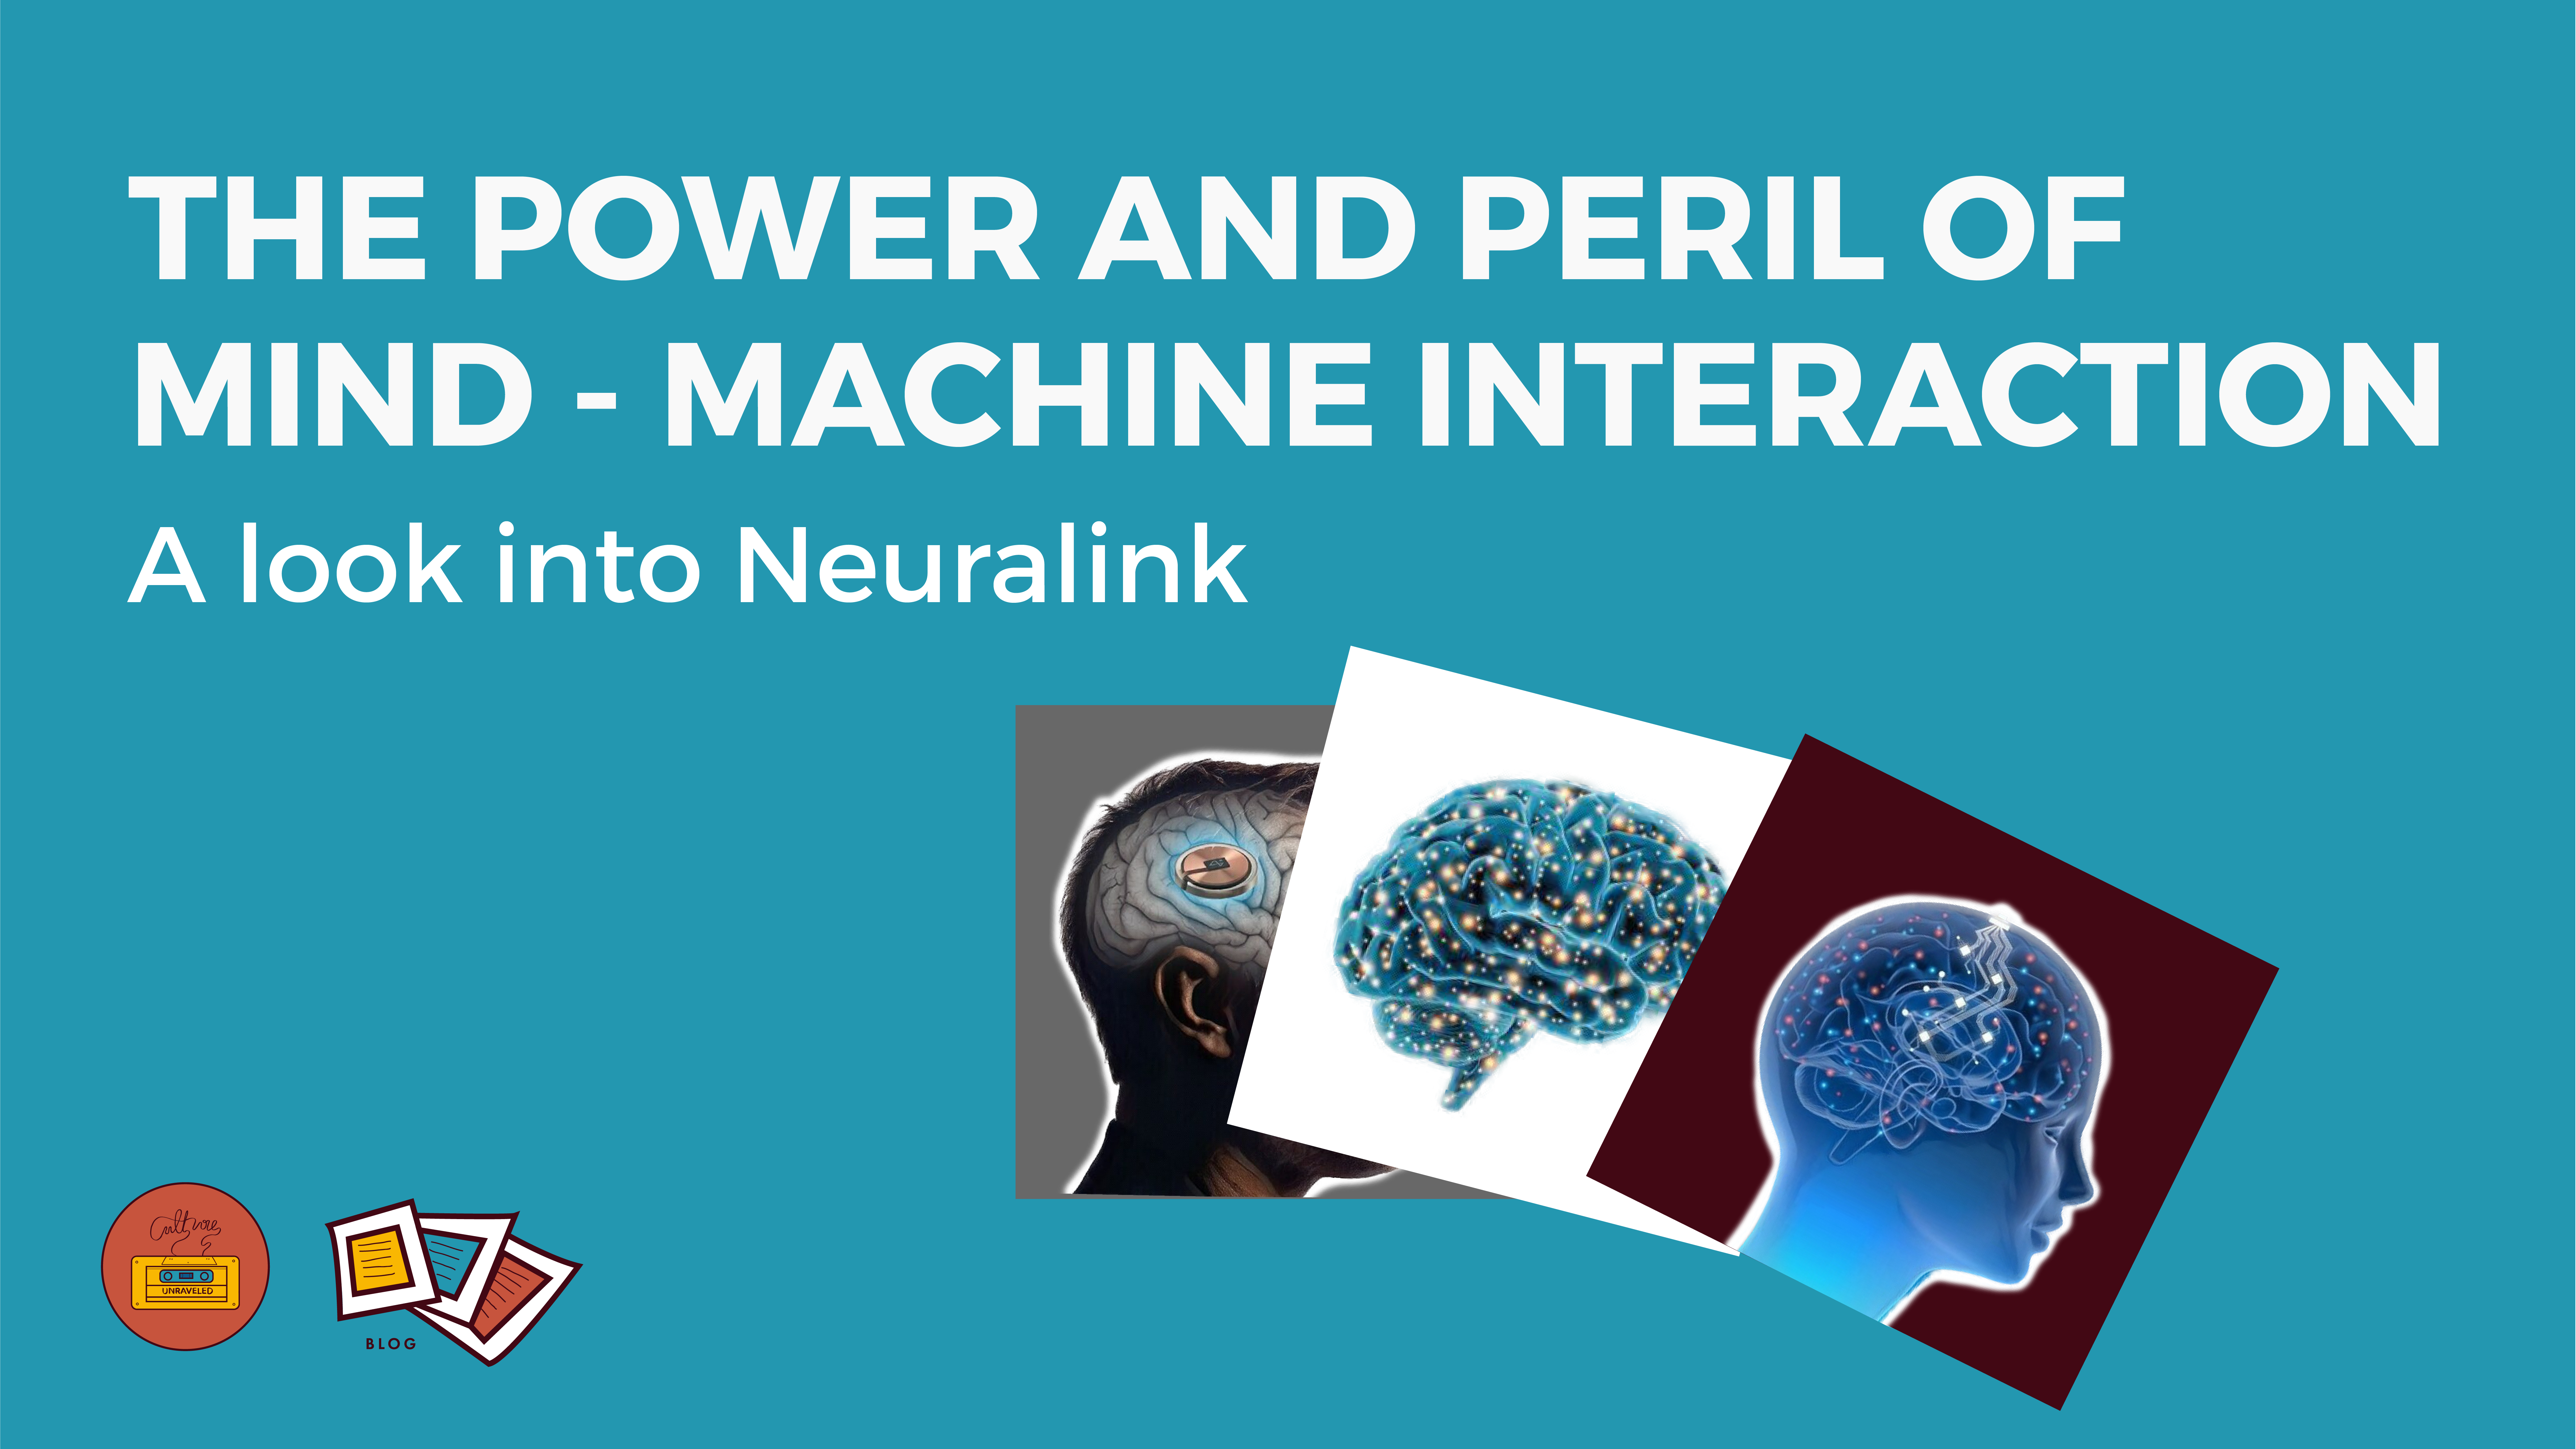 The Power and Peril of Mind-Machine Interaction. A Look into Neuralink